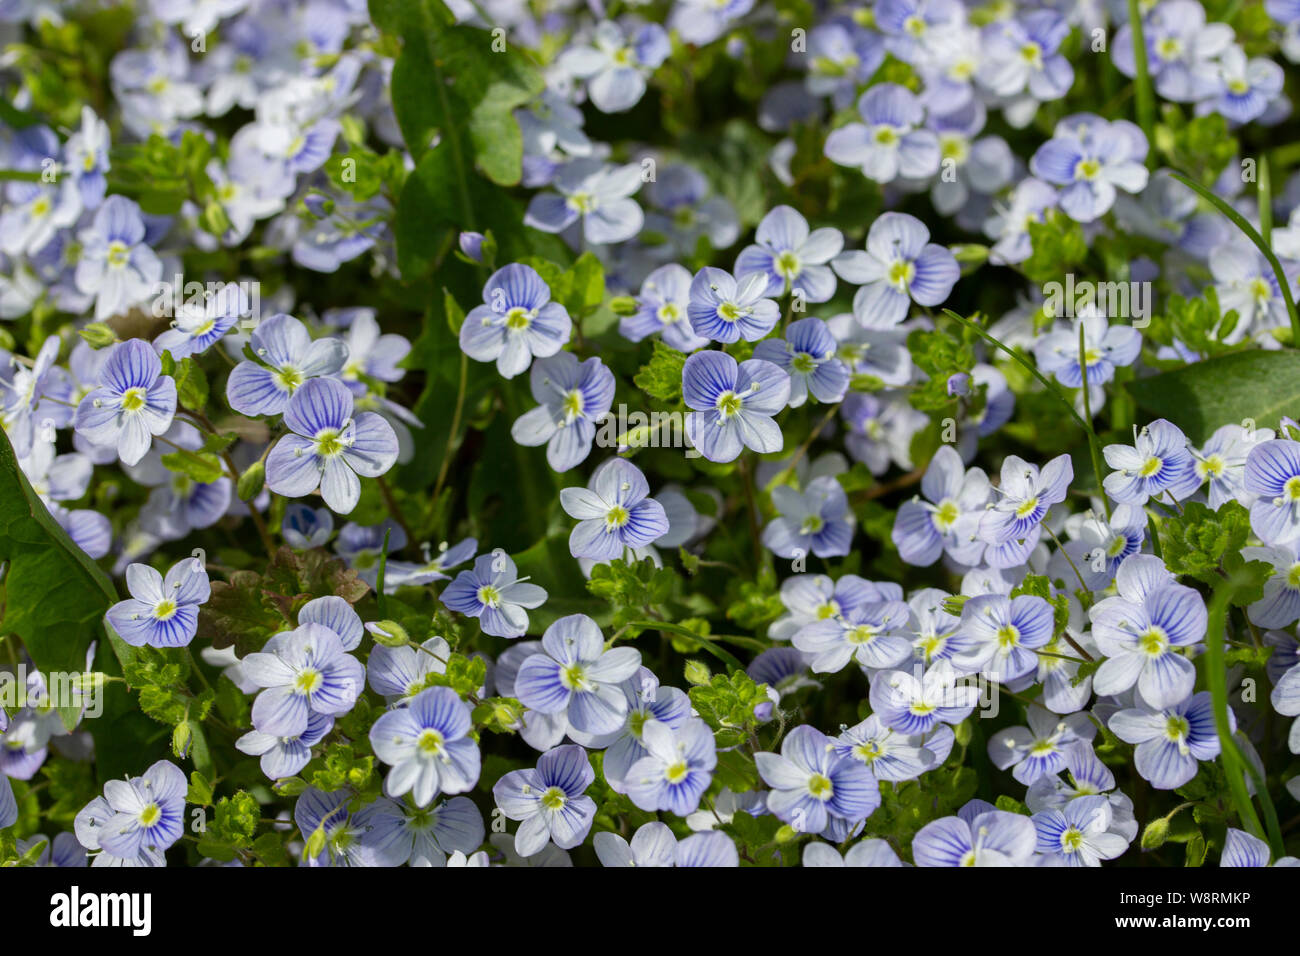 Forget Me Not Wild Flowers Are Gentle Blue Purple White With Leaves Background Wallpaper A Group Of Forget Me Nots In Nature A Lot Of Little Blue F Stock Photo Alamy